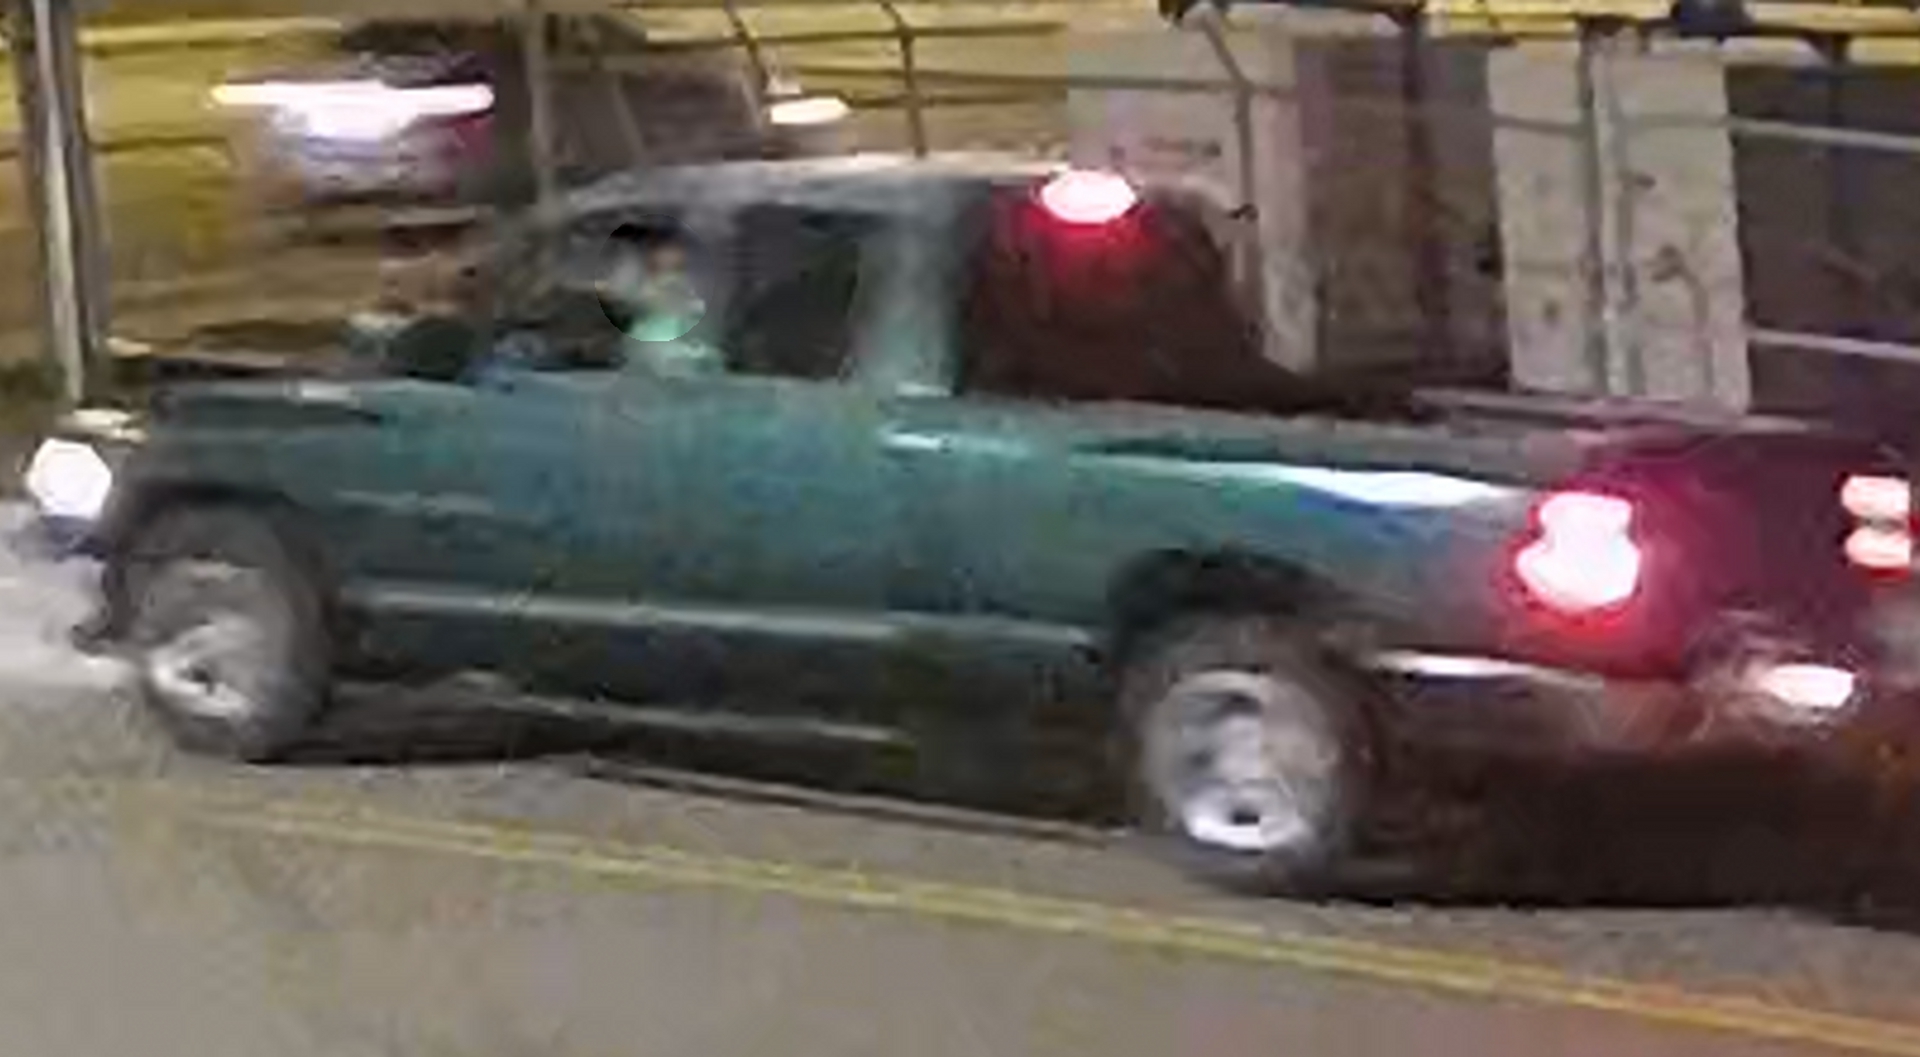 DETECTIVES SEARCHING FOR VEHICLE INVOLVED IN FATAL HIT AND RUN